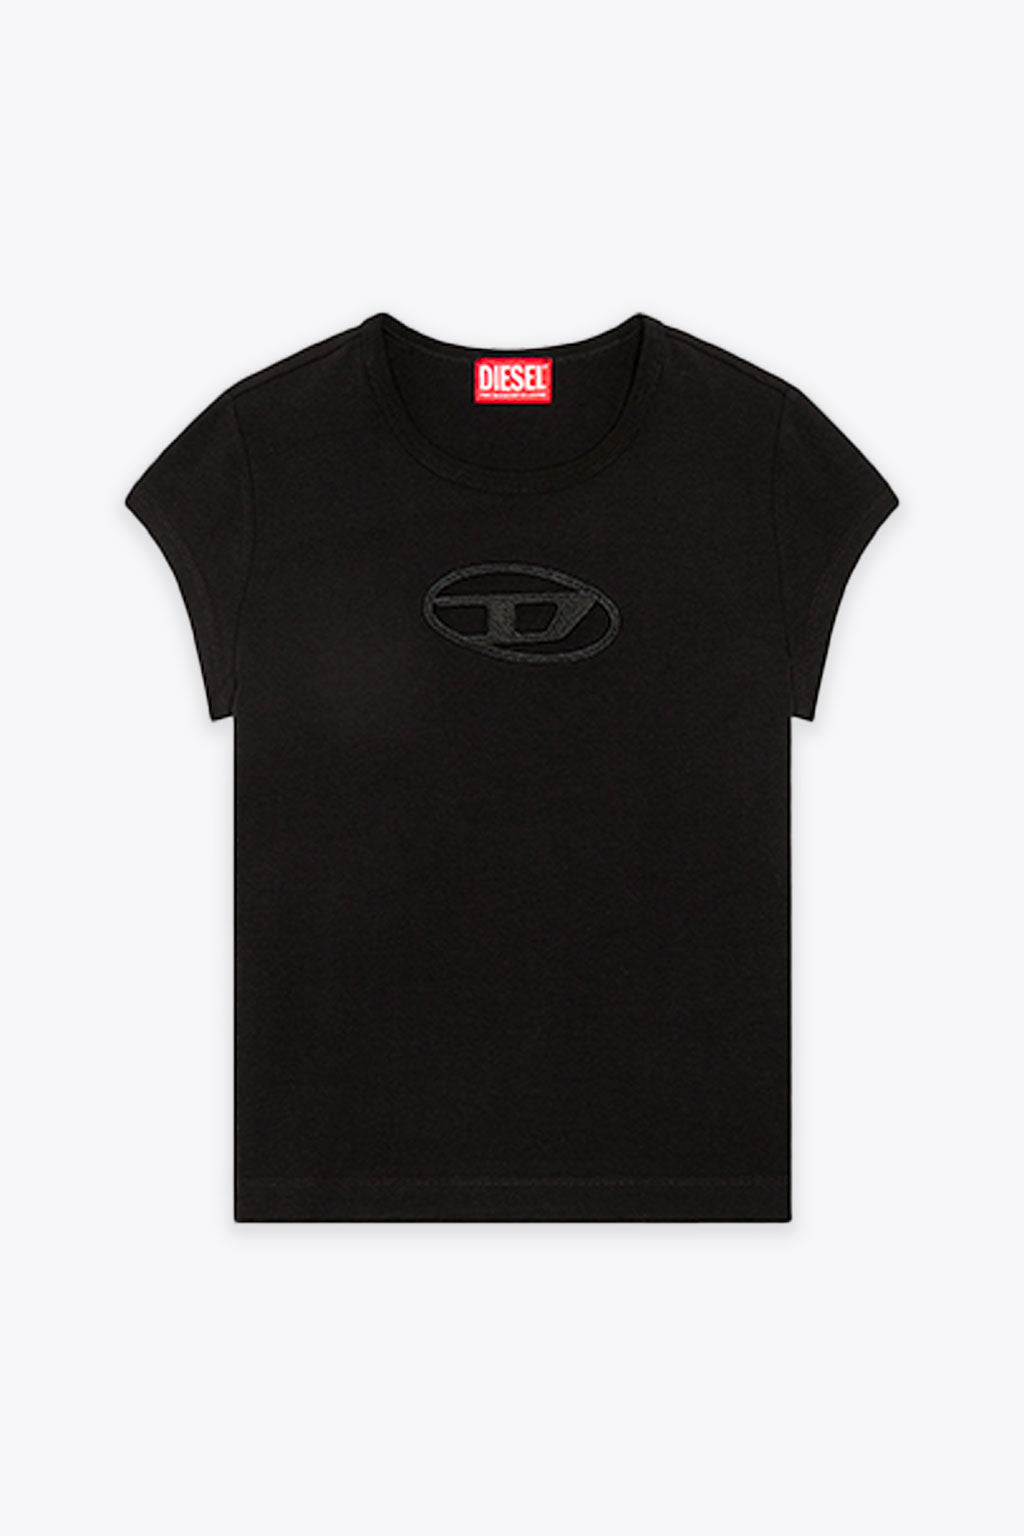 alt-image__Black-cotton-t-shirt-with-oval-D-embroidery---T-Angie